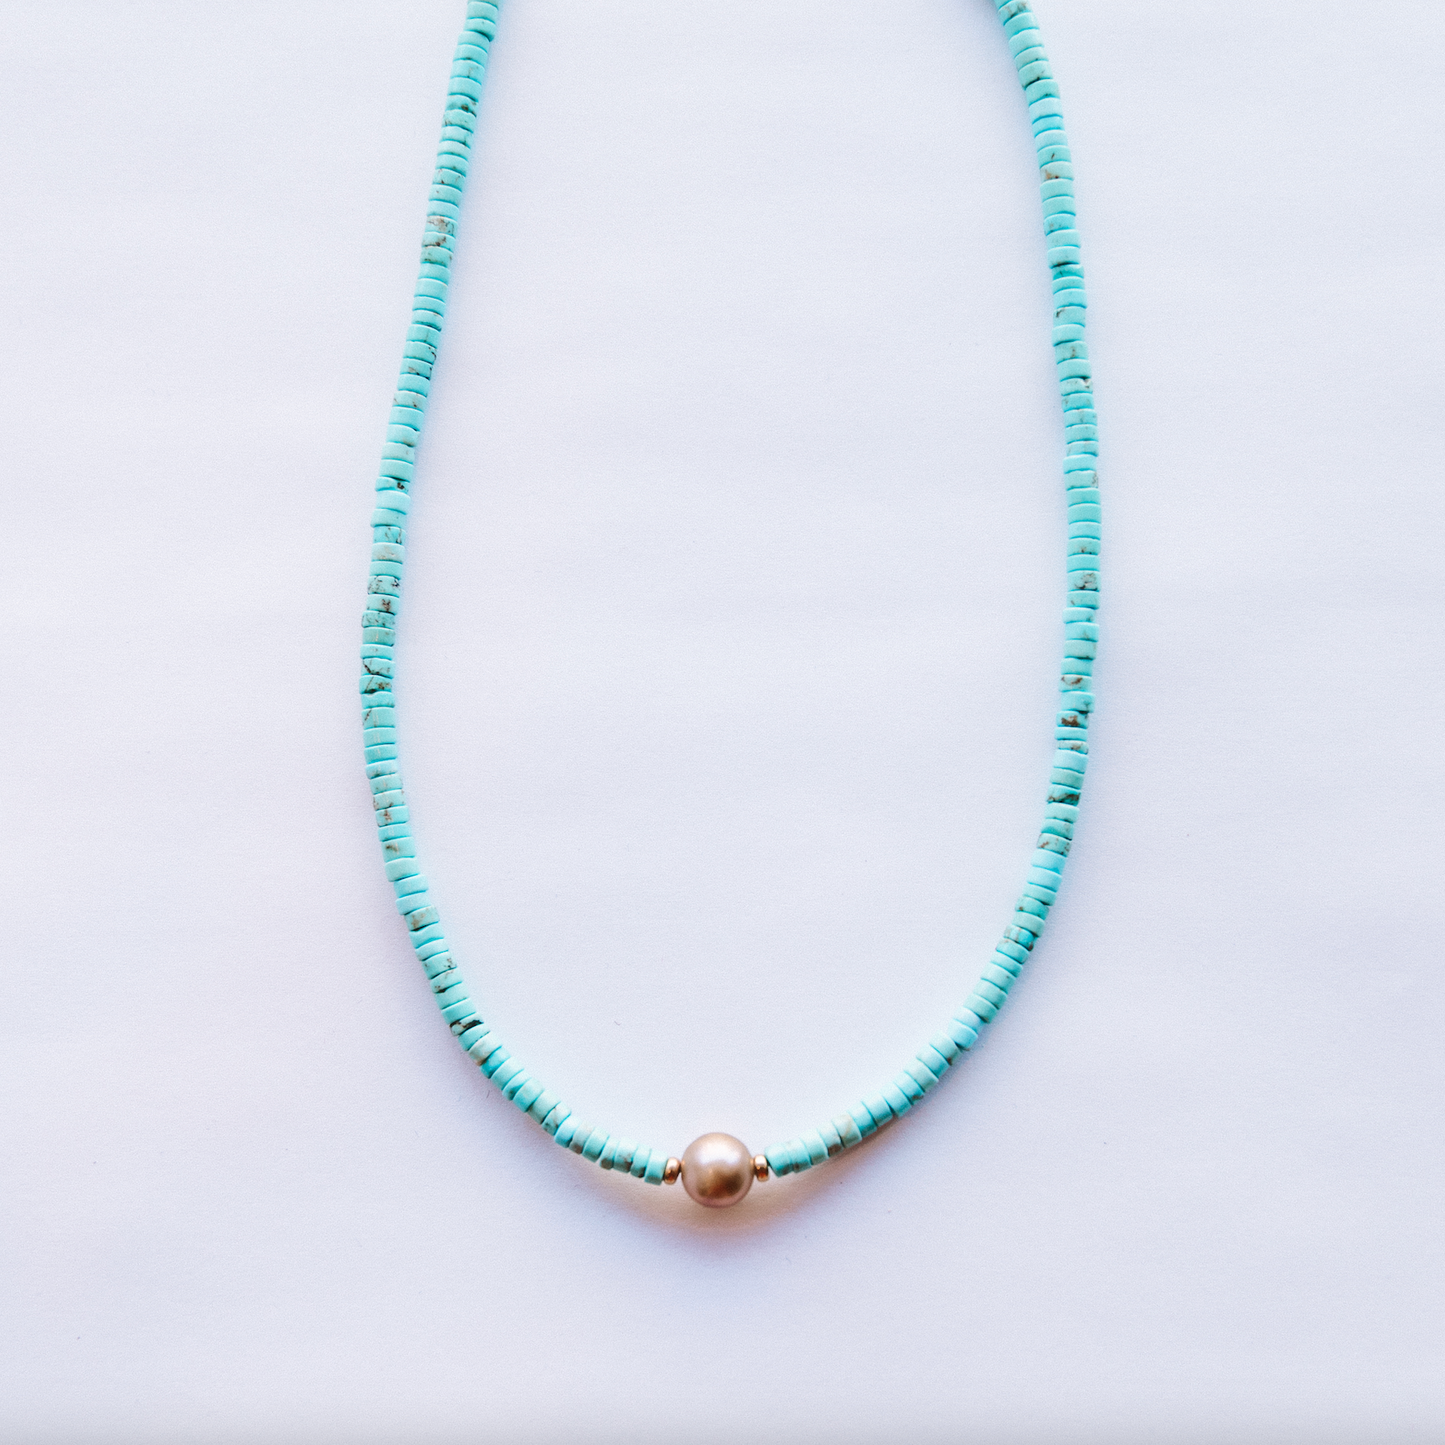 The Turquoise Pearl Necklace